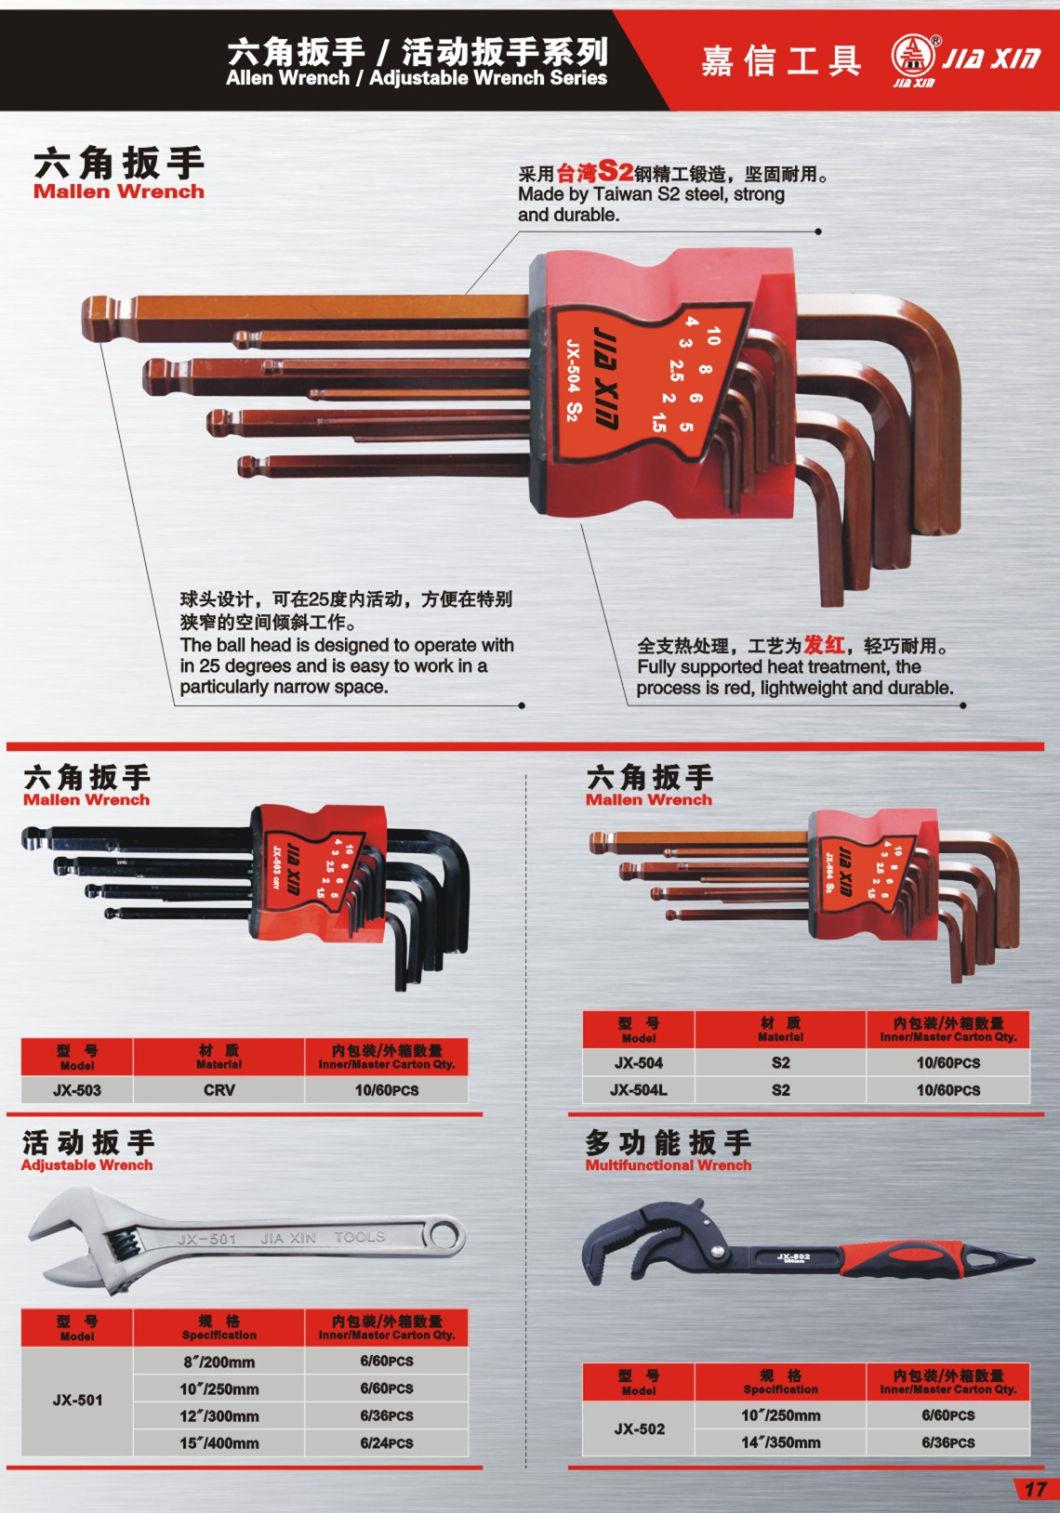 High Quality Ratchet Wrench Set Labor-Saving Manual Wrench Set